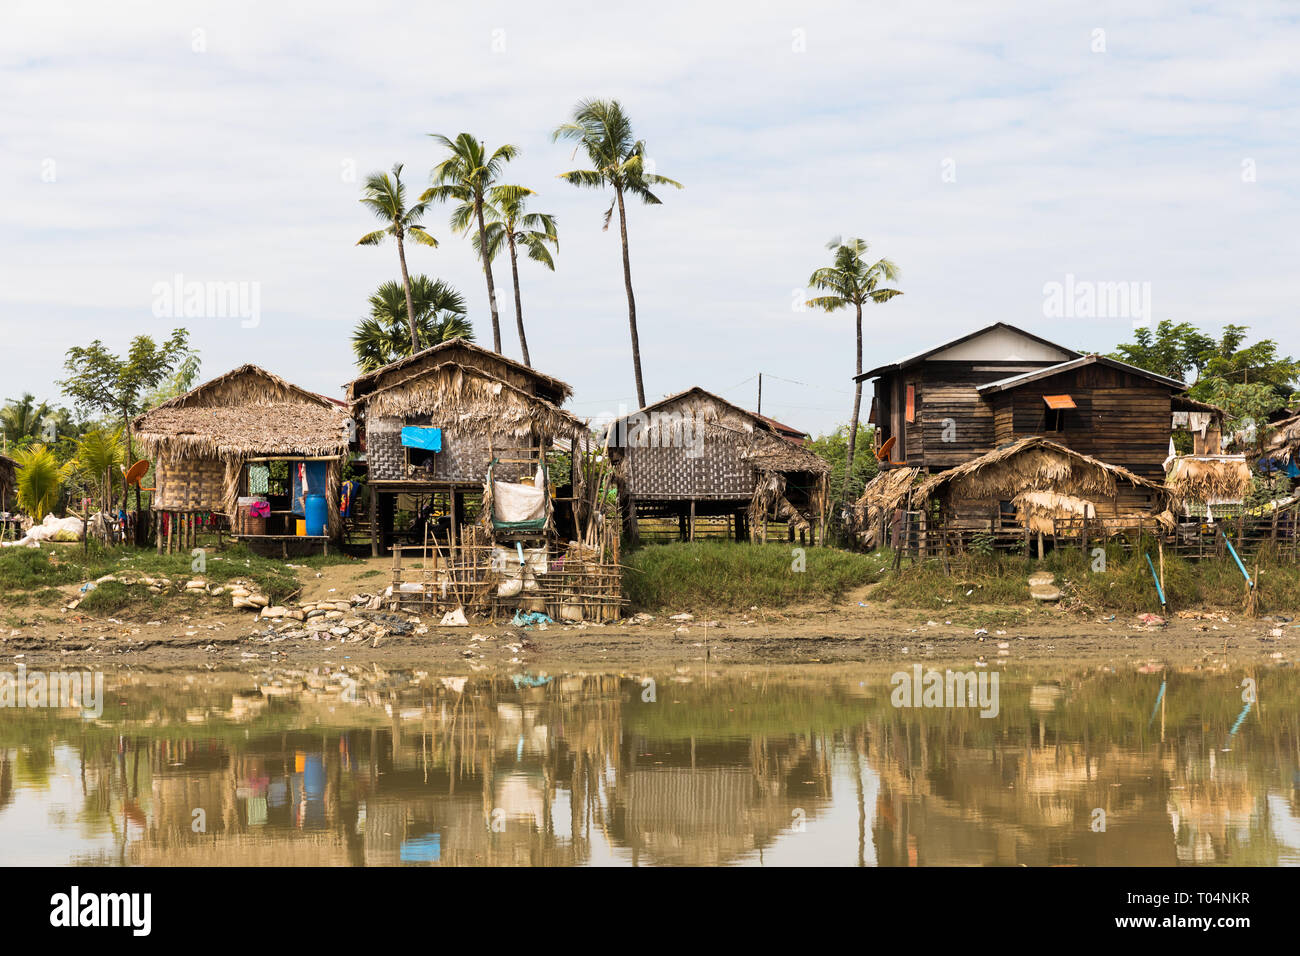 Rural village life in a small town in Myanmar (Burma) Stock Photo